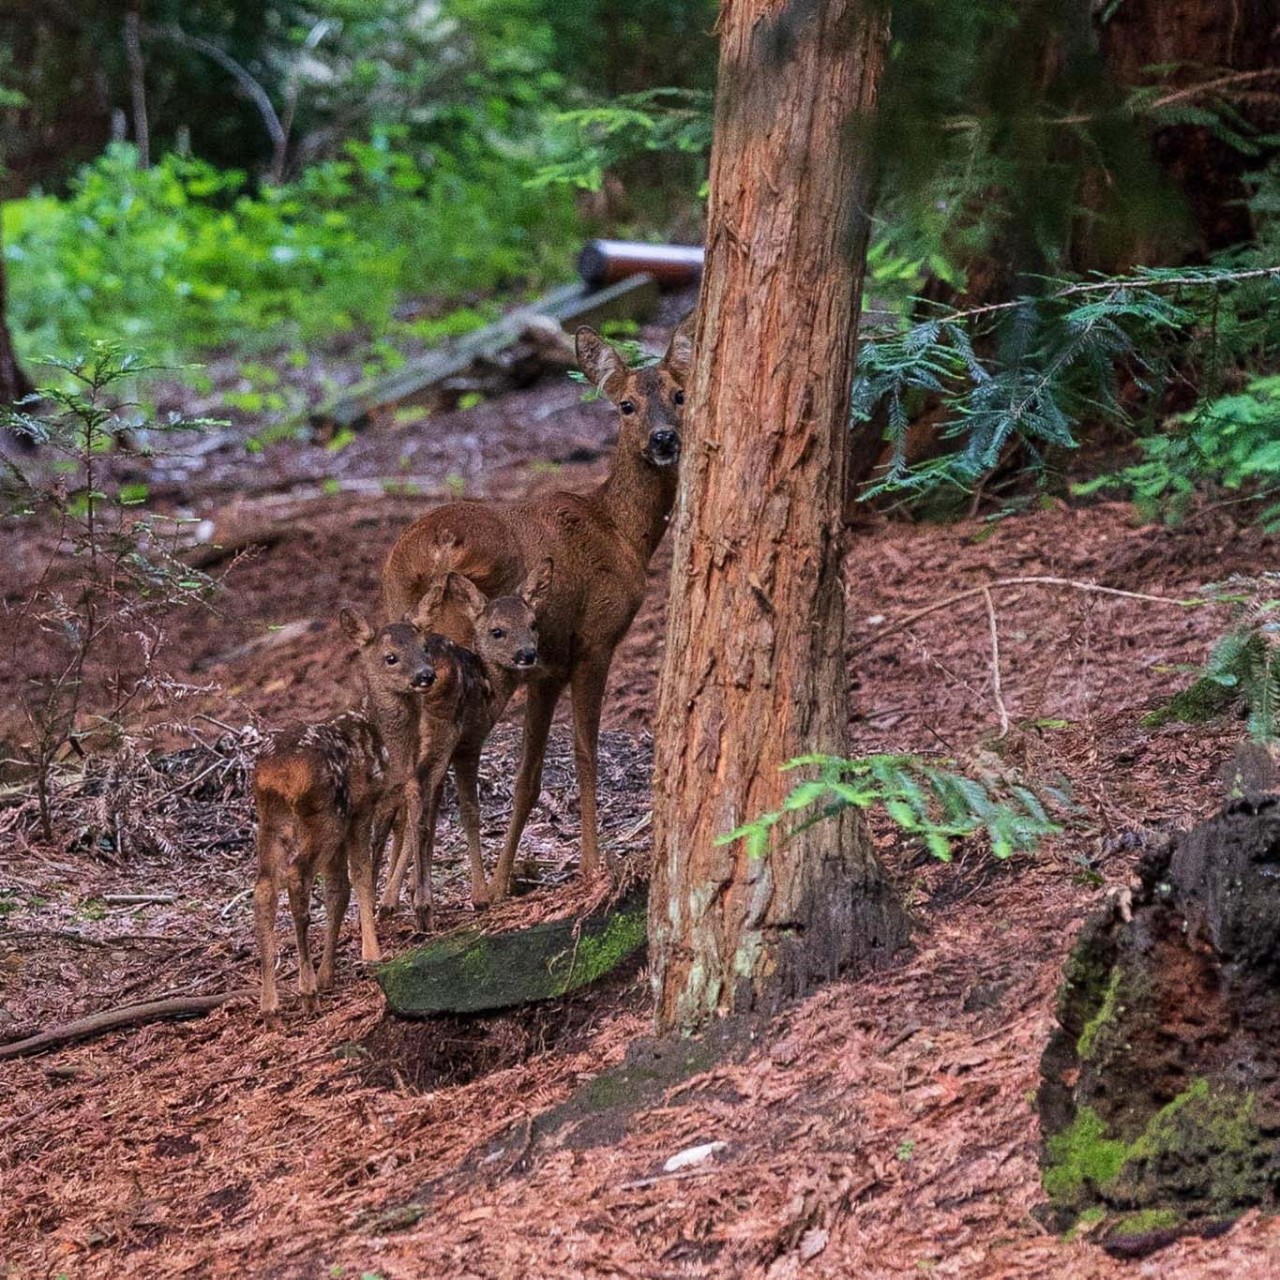 Deer and foals in forest